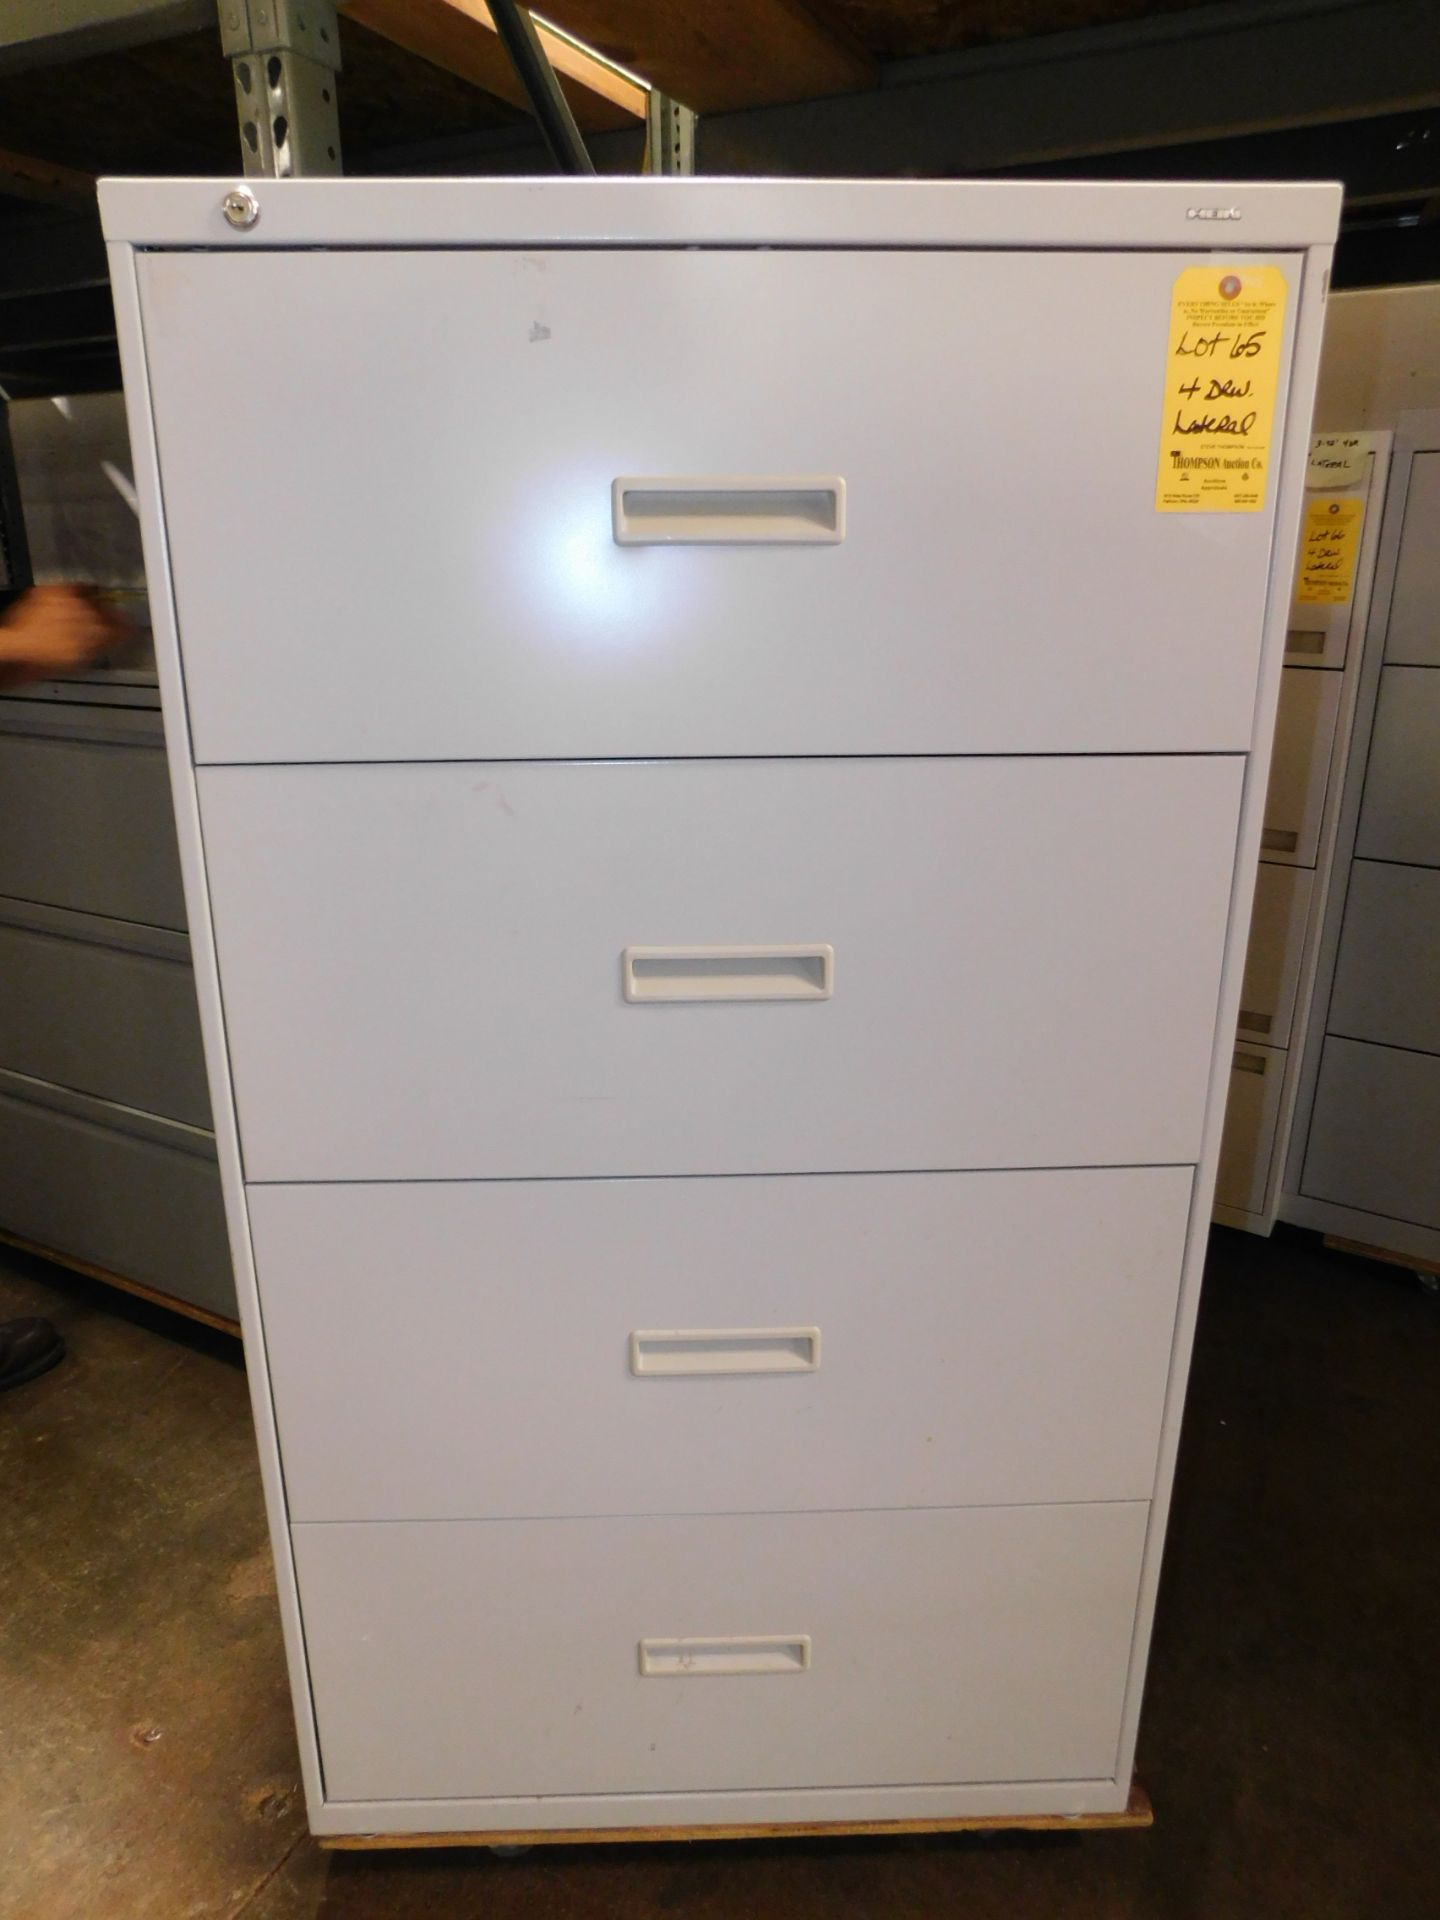 4-Drawer Lateral File